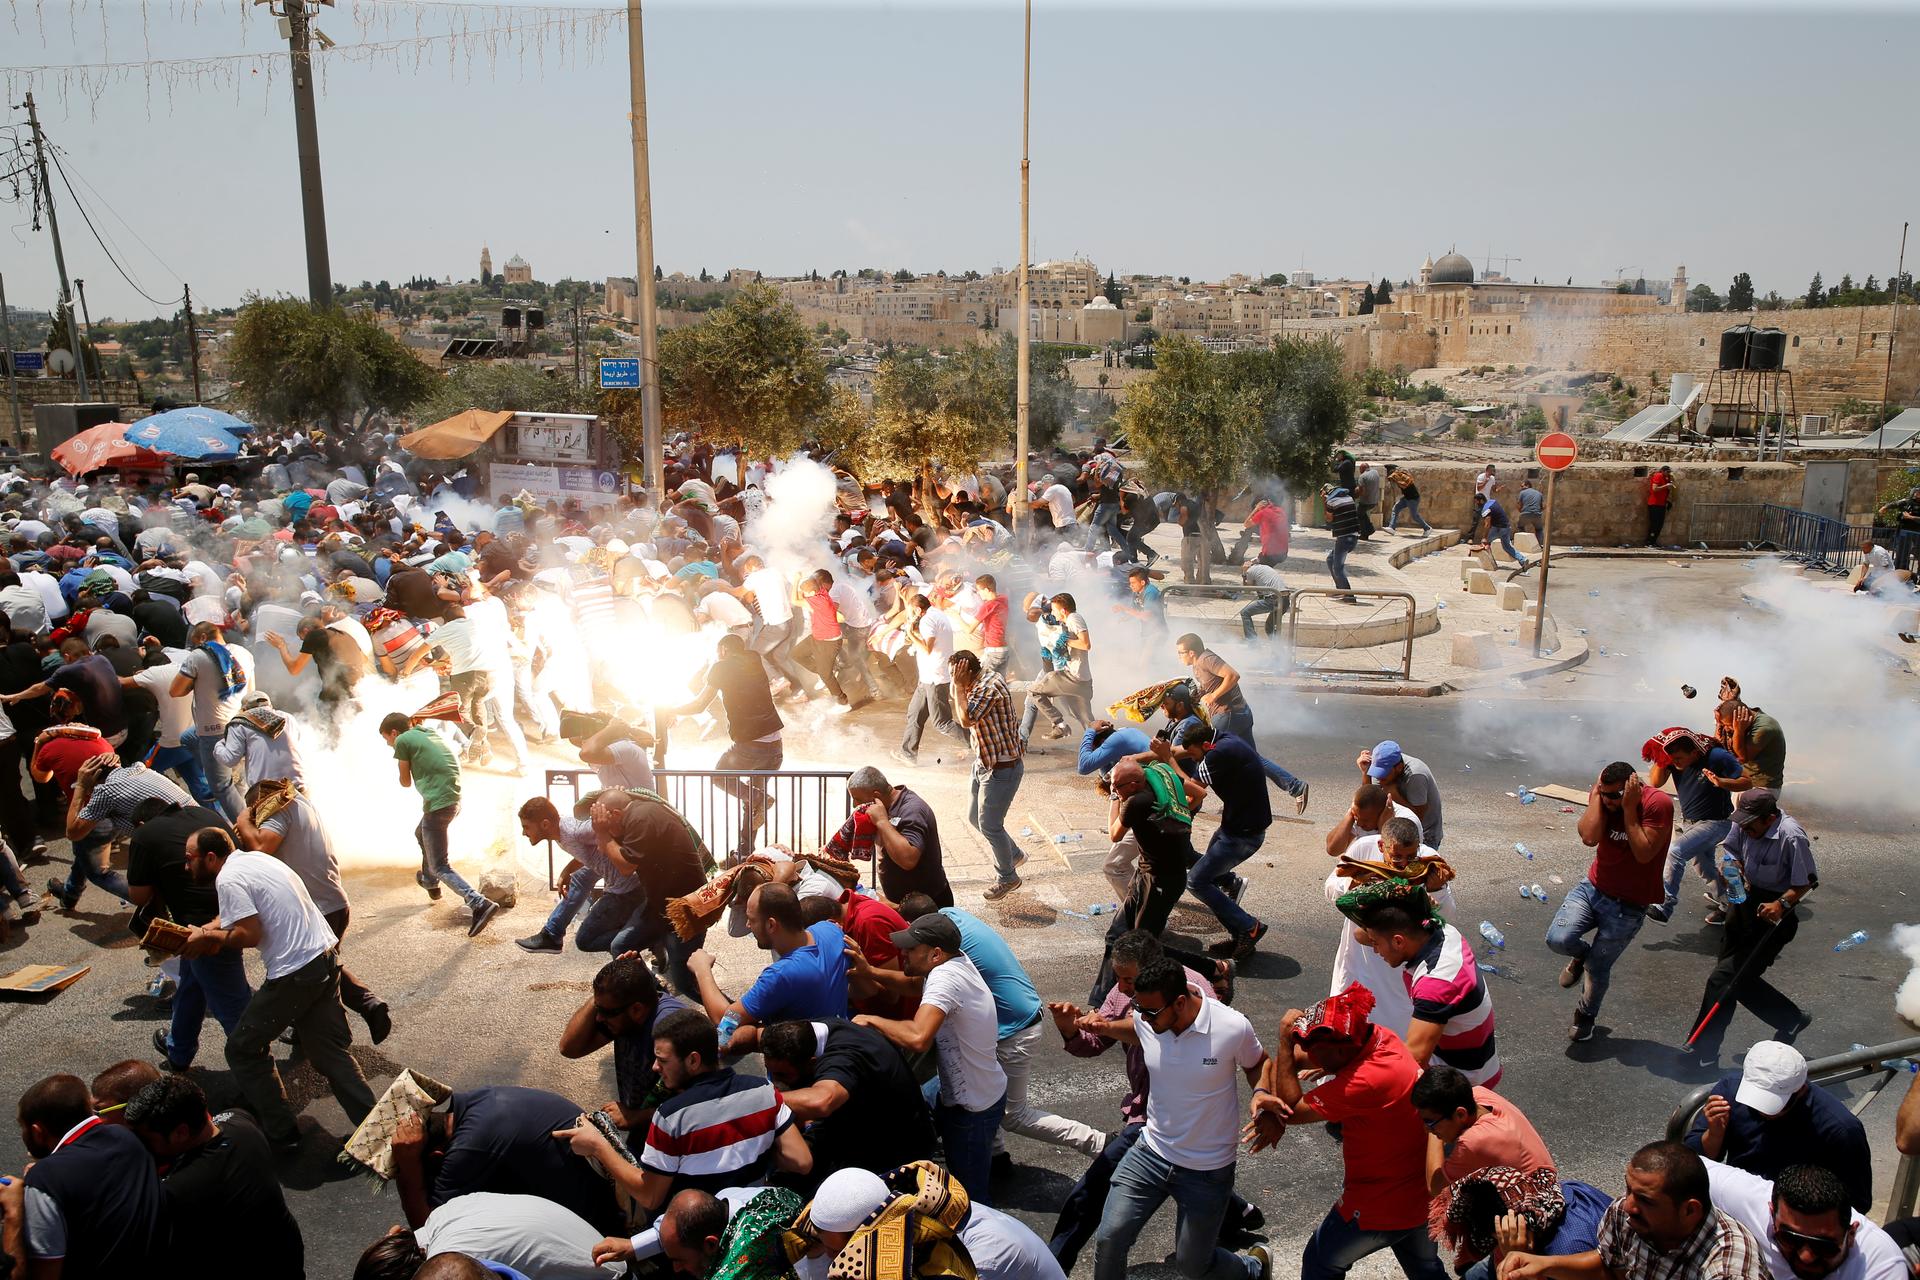 Palestinians react following tear gas that was shot by Israeli forces after Friday prayer on a street outside Jerusalem's Old city